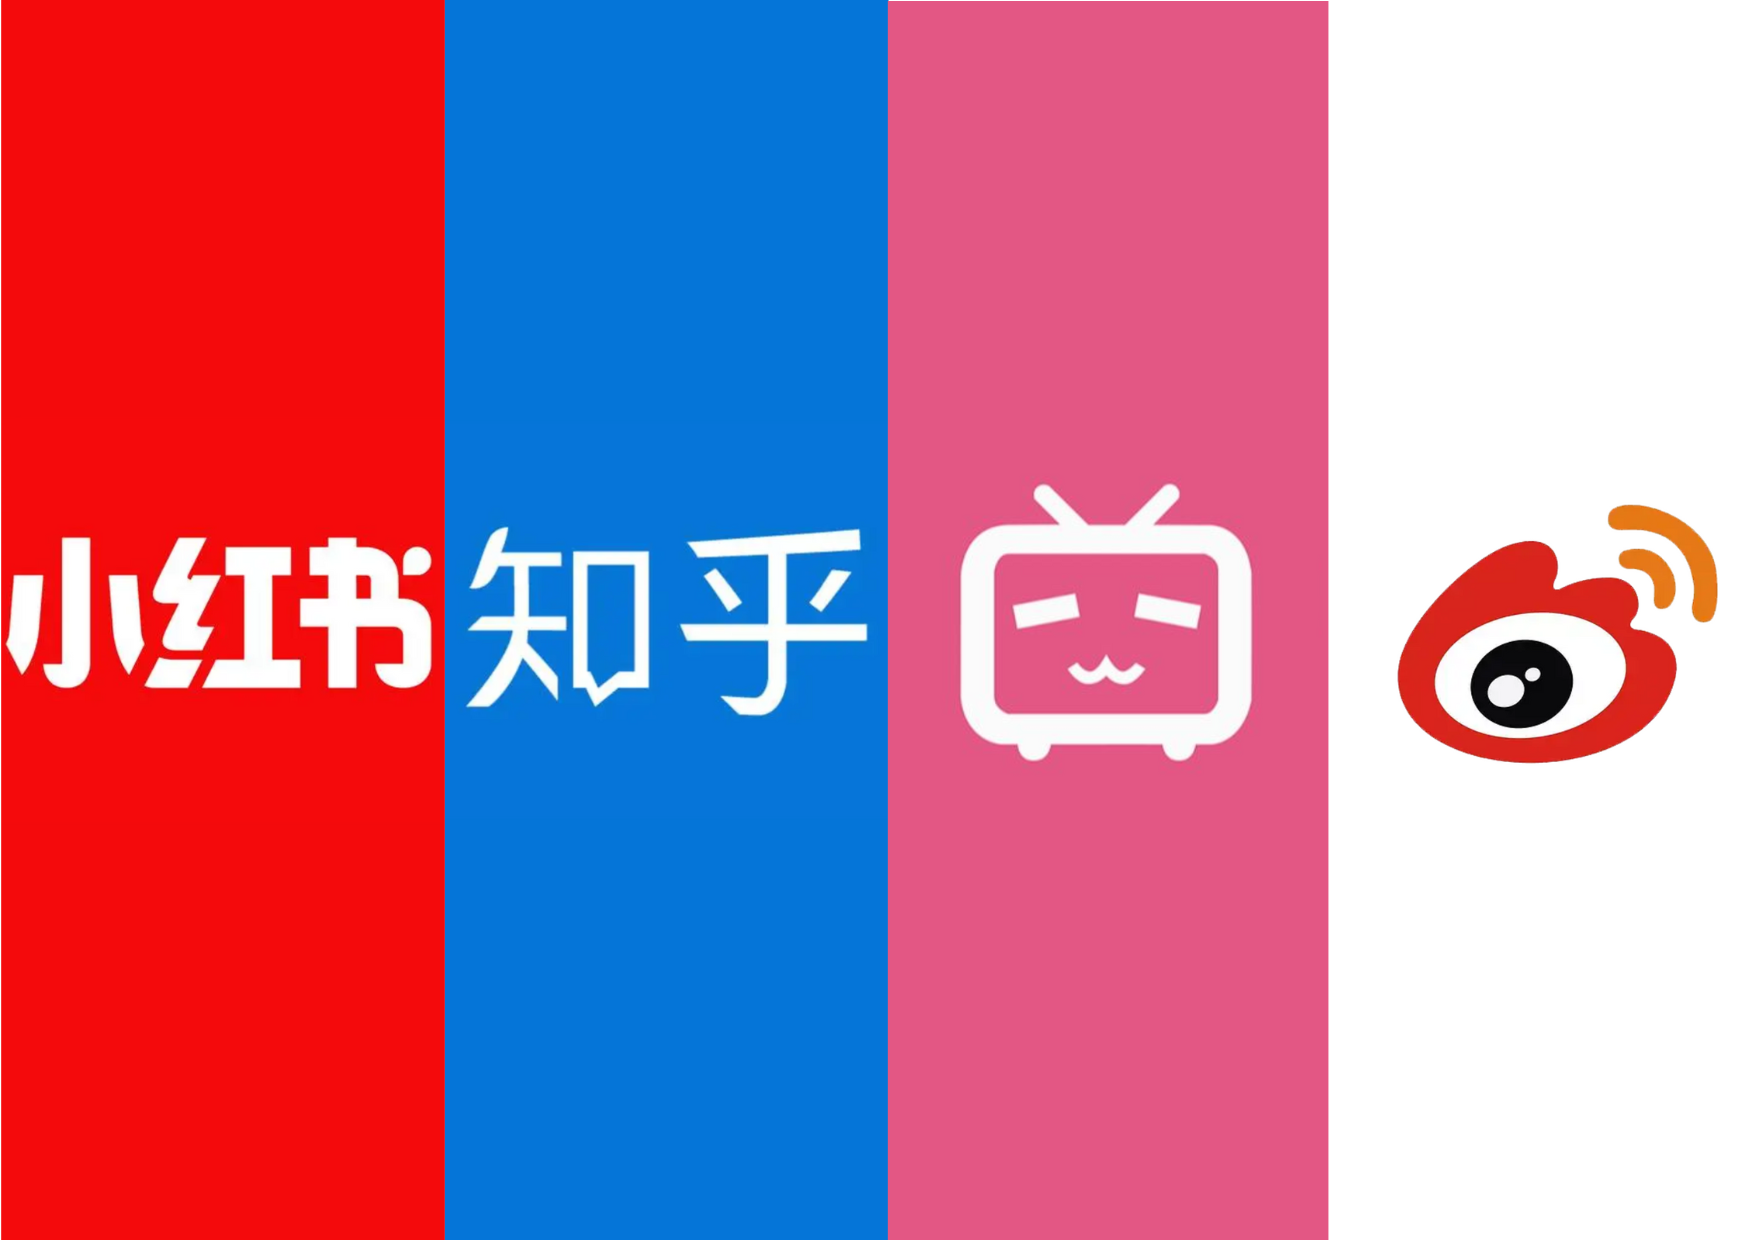 CHINESE SOICAL MEDIA